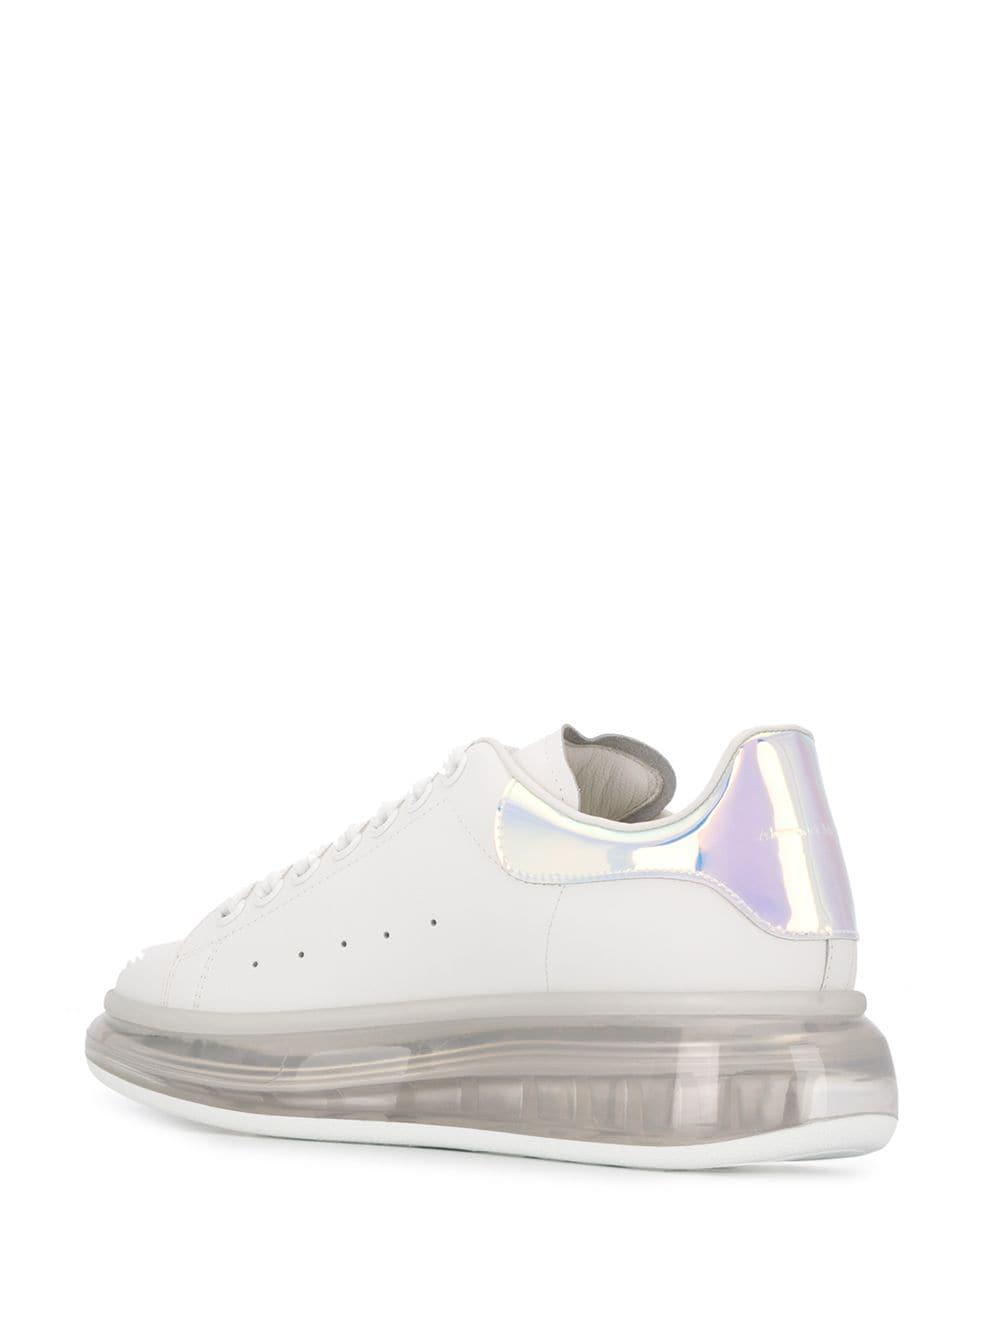 Alexander McQueen Leather Oversized Clear Sole Sneakers in White 